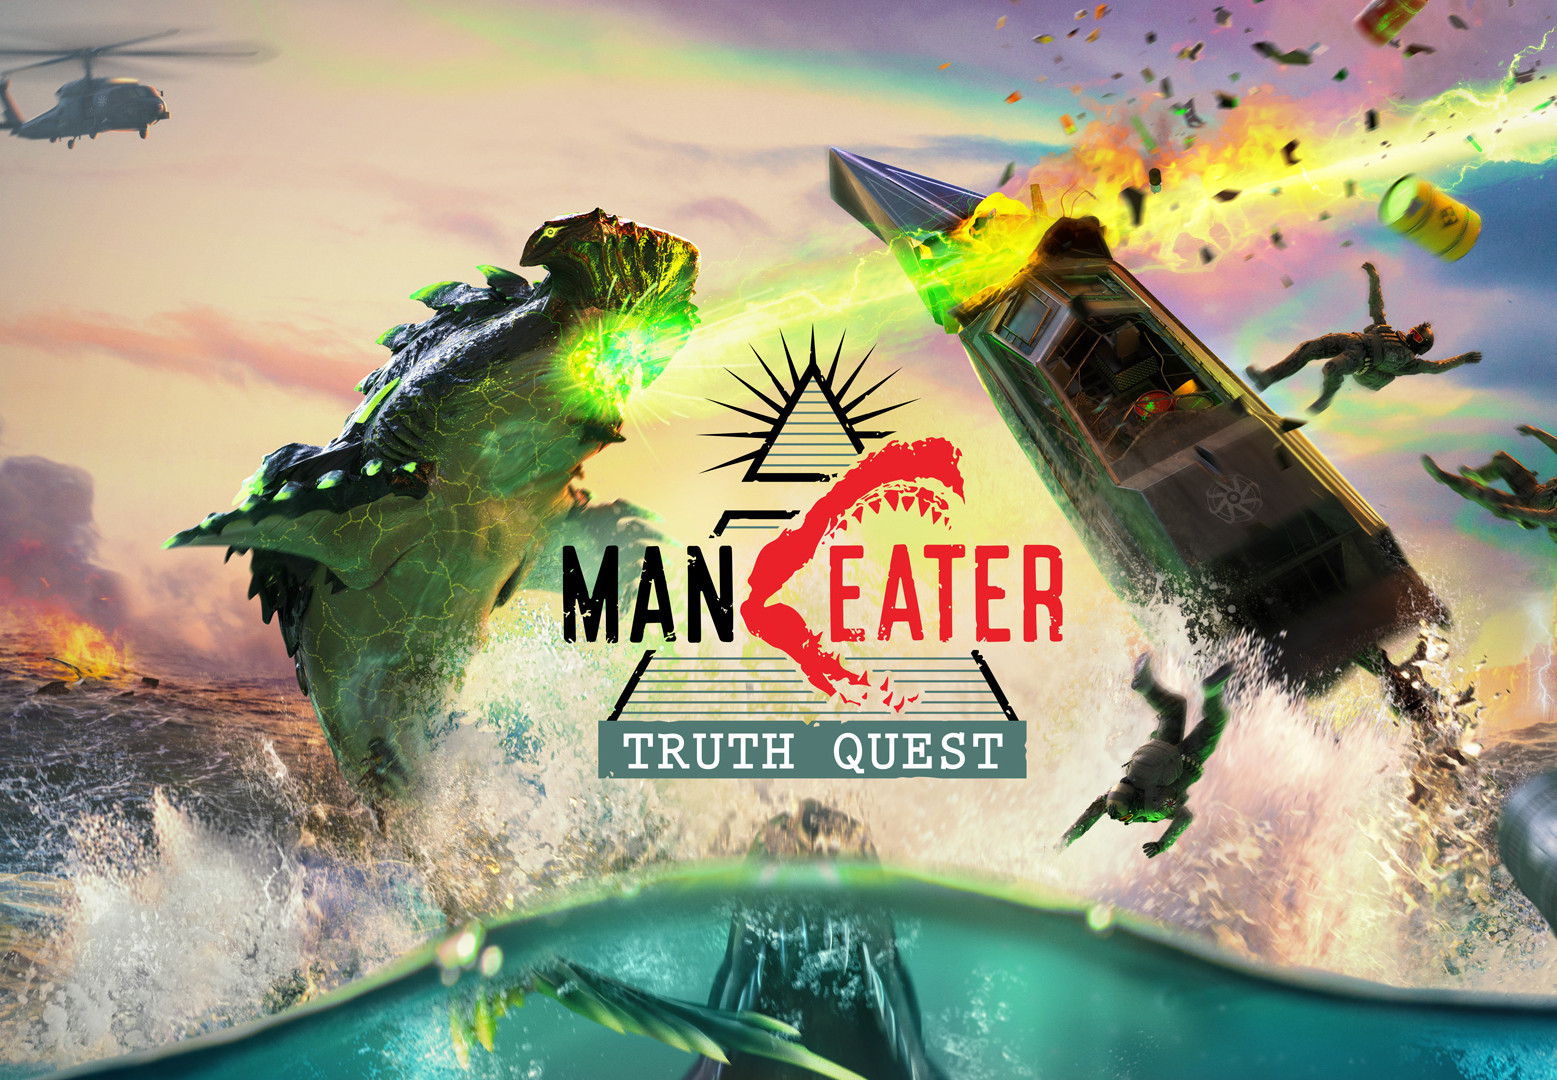 Maneater - Truth Quest DLC Epic Games CD Key